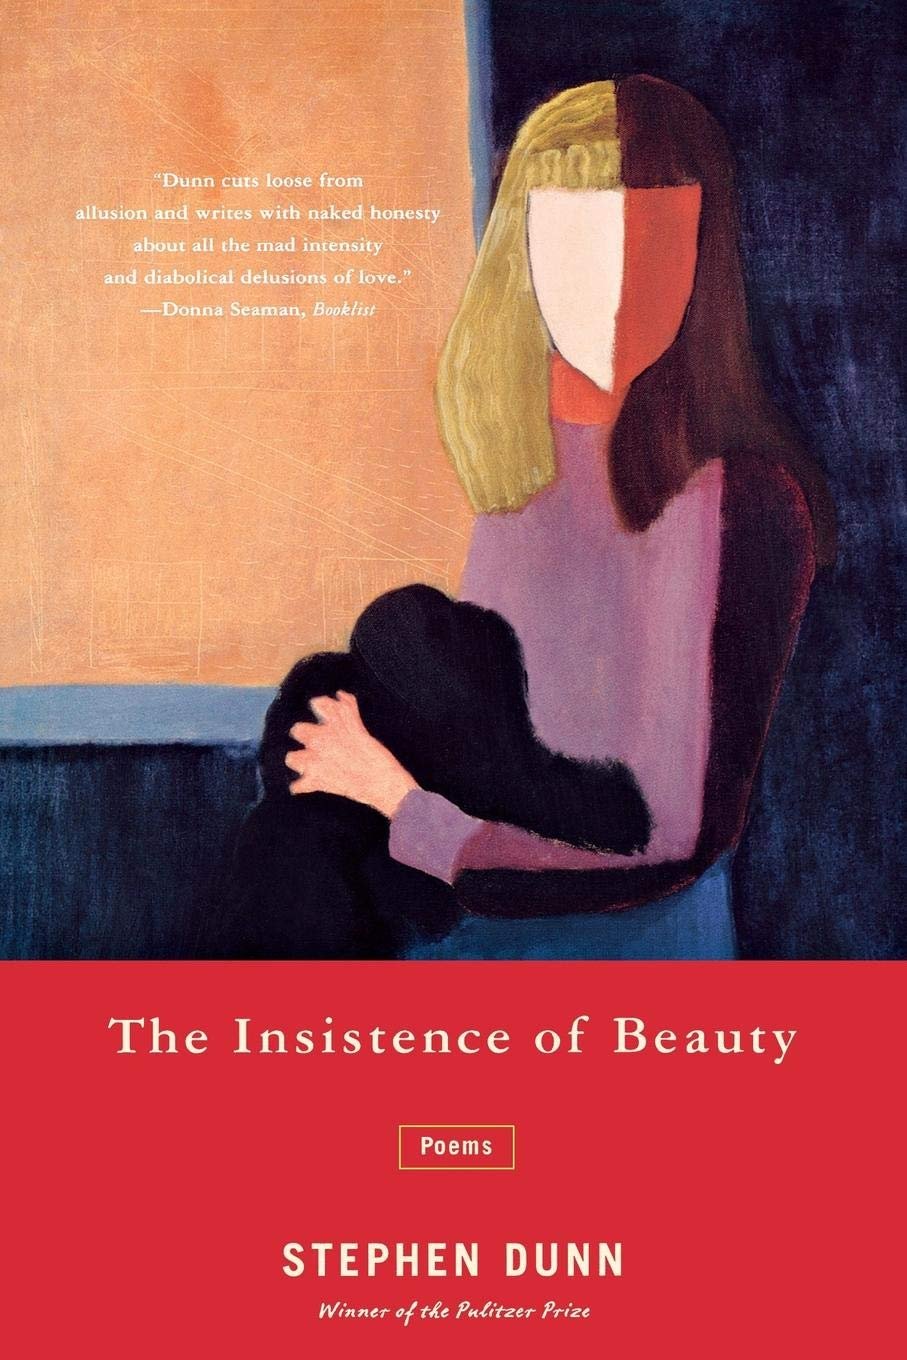 The Insistence of Beauty